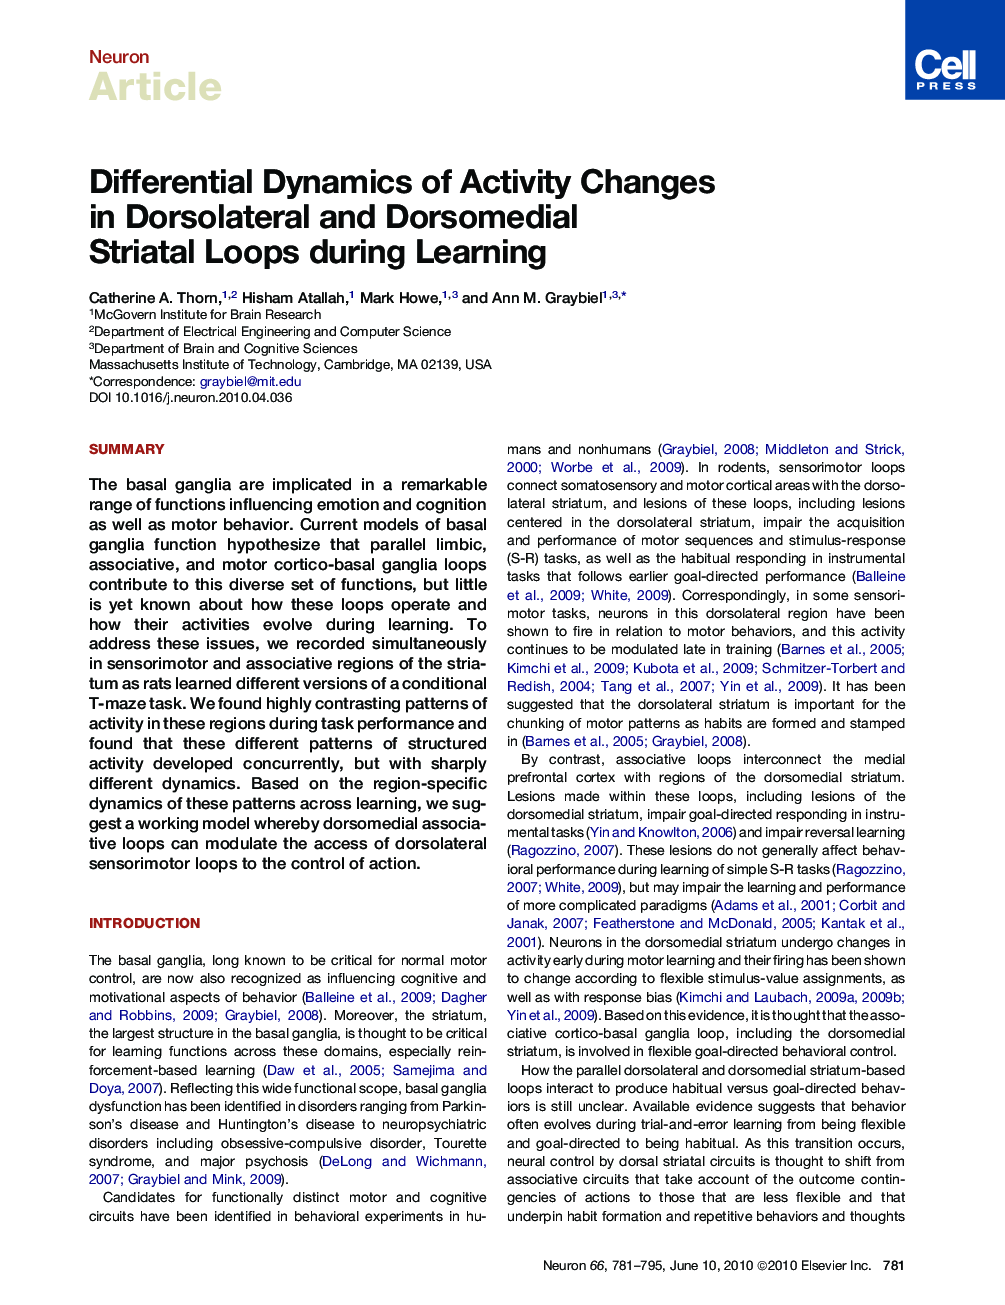 Differential Dynamics of Activity Changes in Dorsolateral and Dorsomedial Striatal Loops during Learning